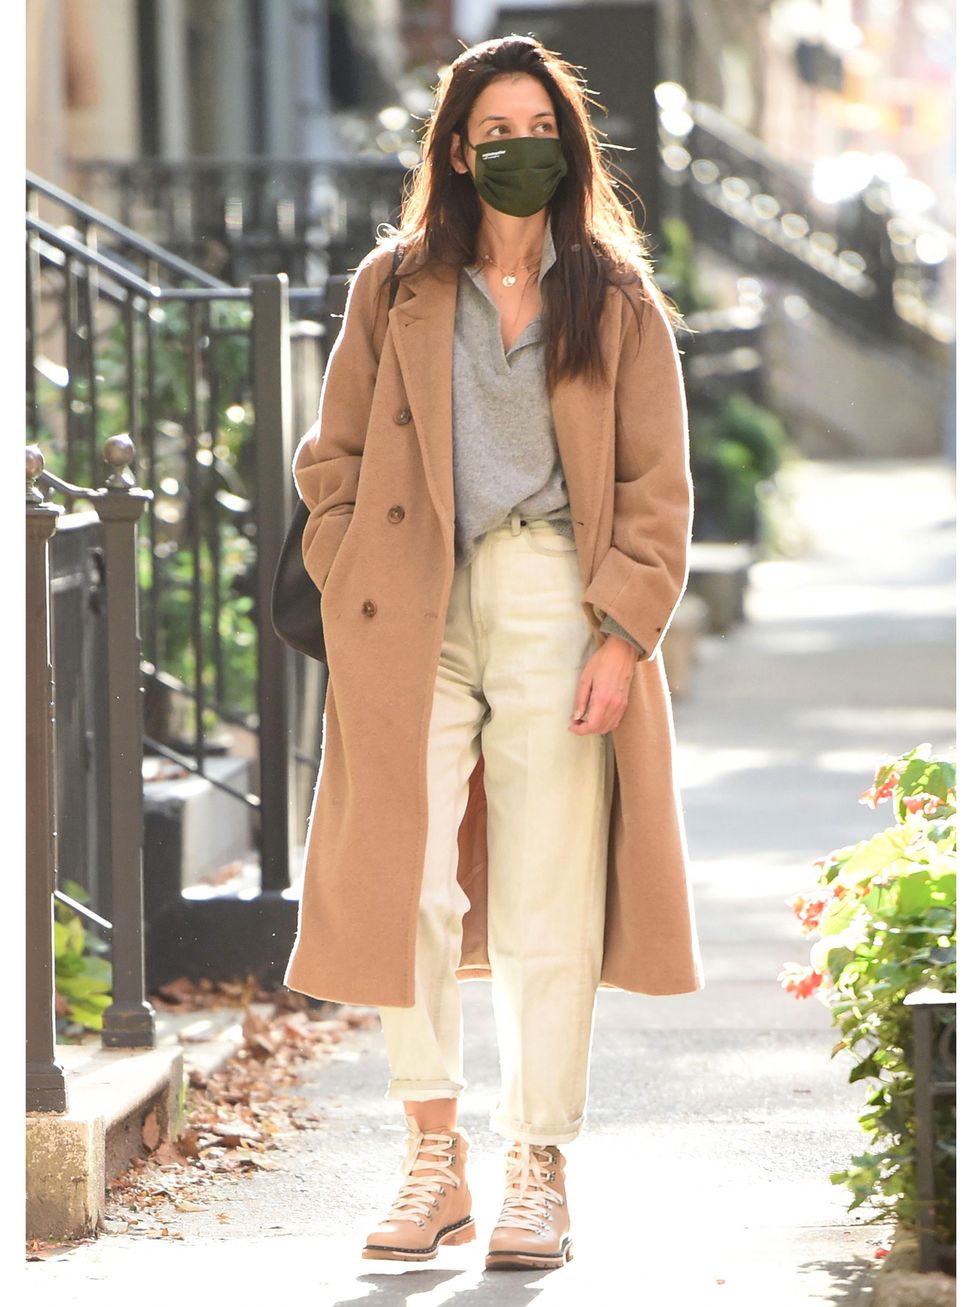 exclusivemandatory credit photo by jason merrittradarpicsshutterstock 10958167cexclusive   katie holmes walks around new york city in sorelkatie holmes out and about, new york, usa   15 oct 2020